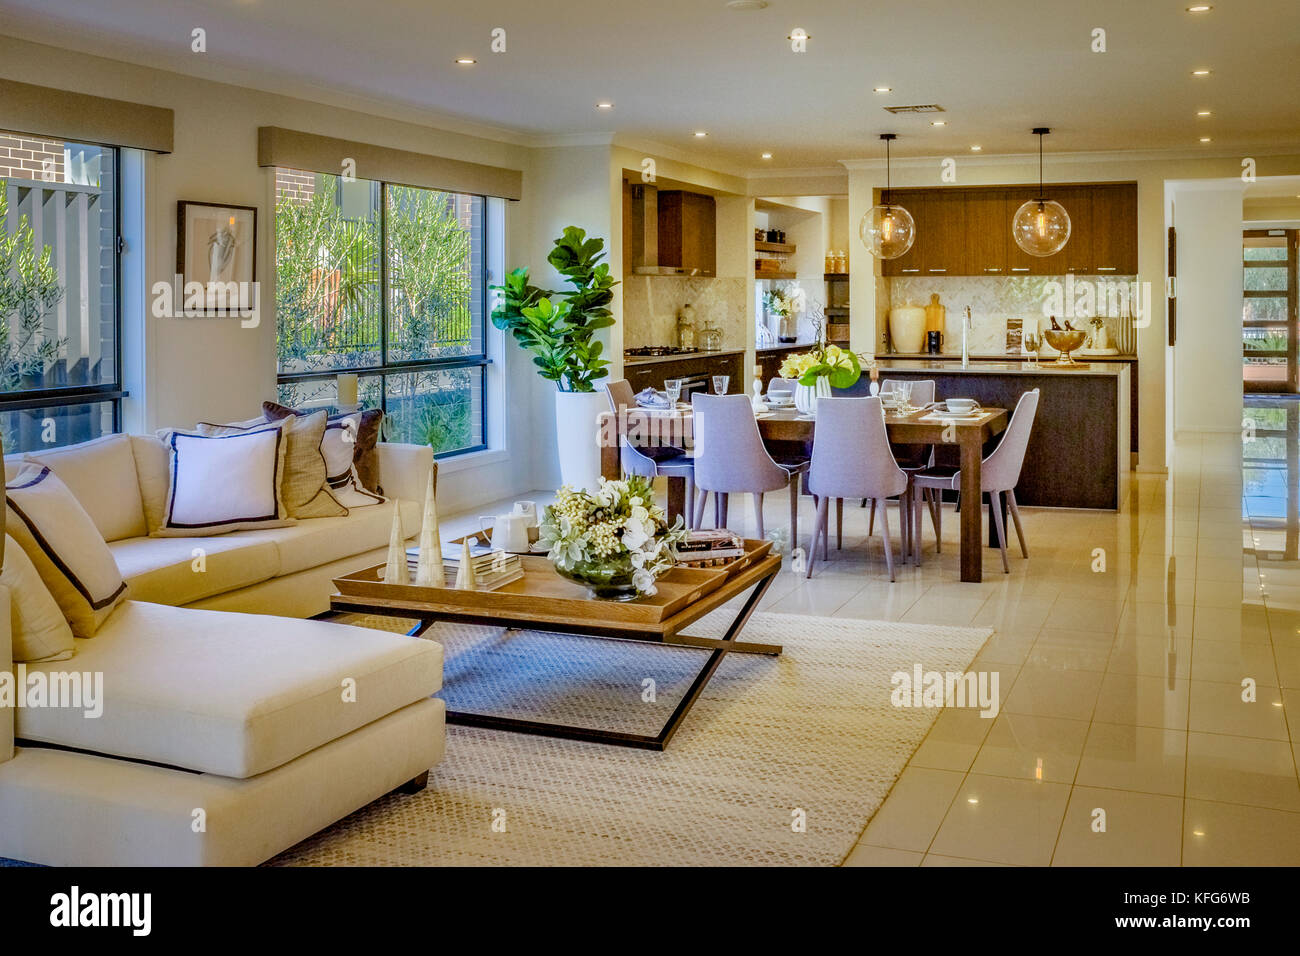 Australian Home Interior High Resolution Stock Photography Images - Alamy